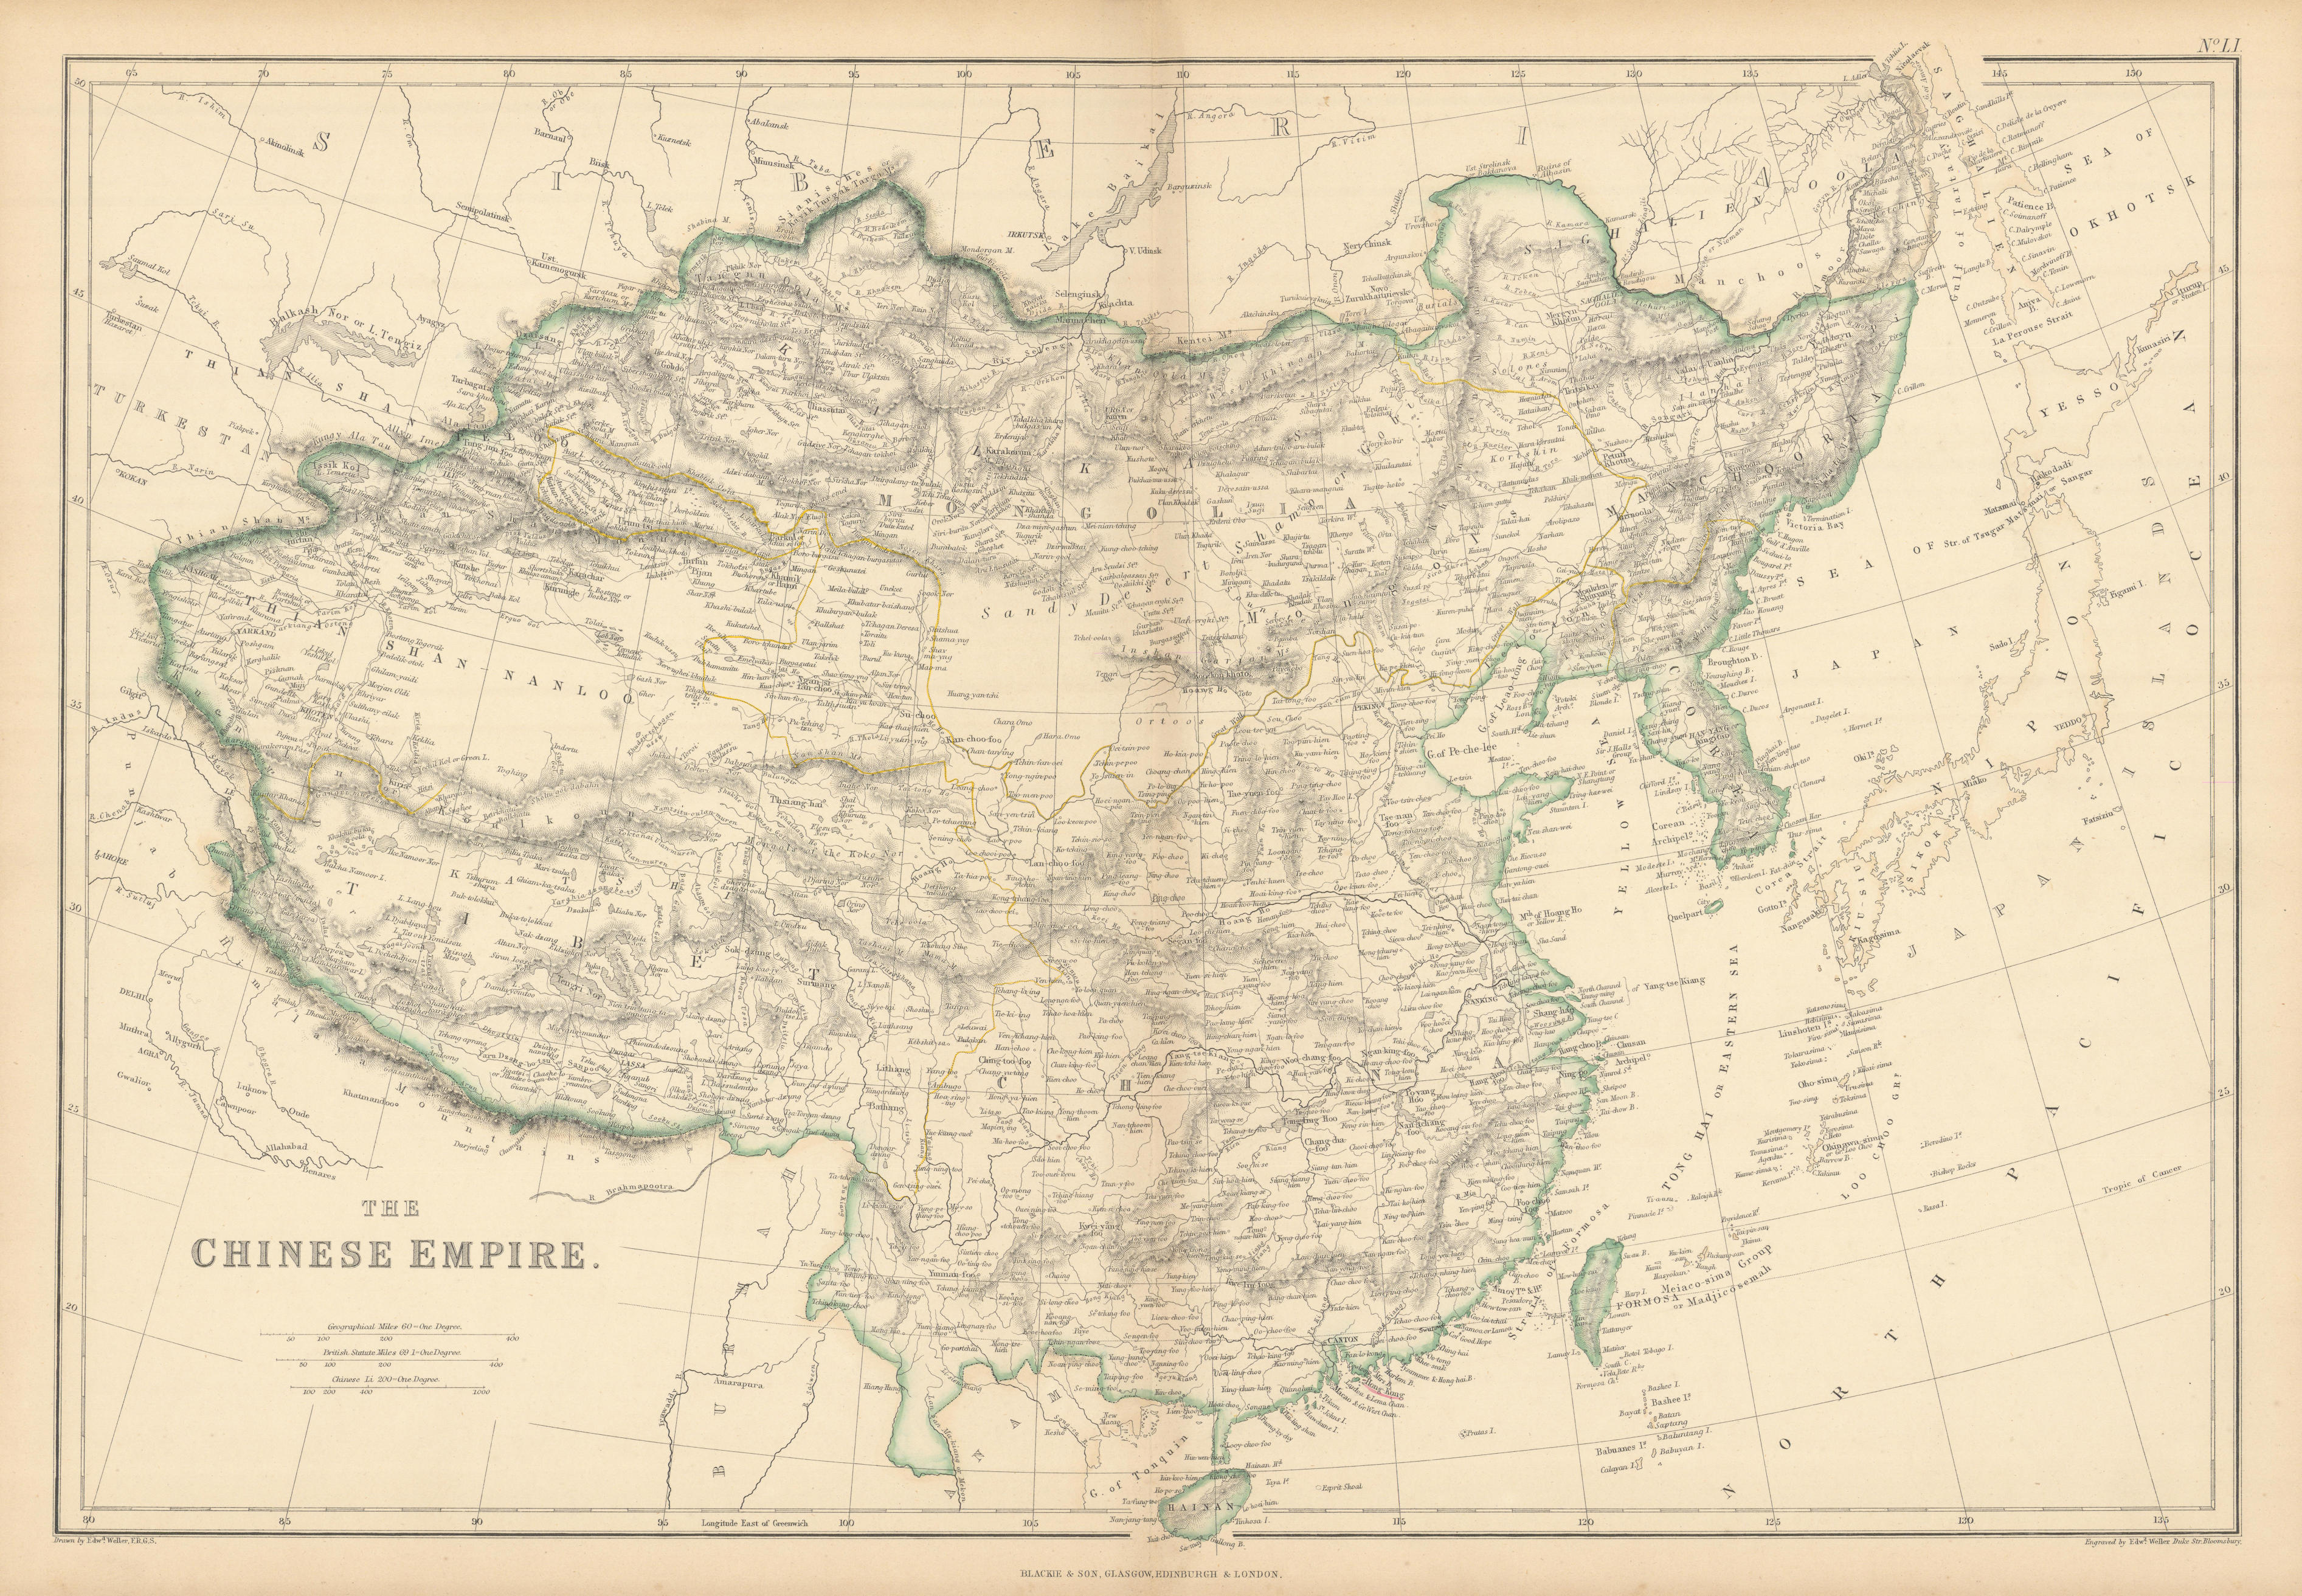 Associate Product The Chinese Empire by Edward Weller. China, Mongolia, Tibet & Korea 1859 map